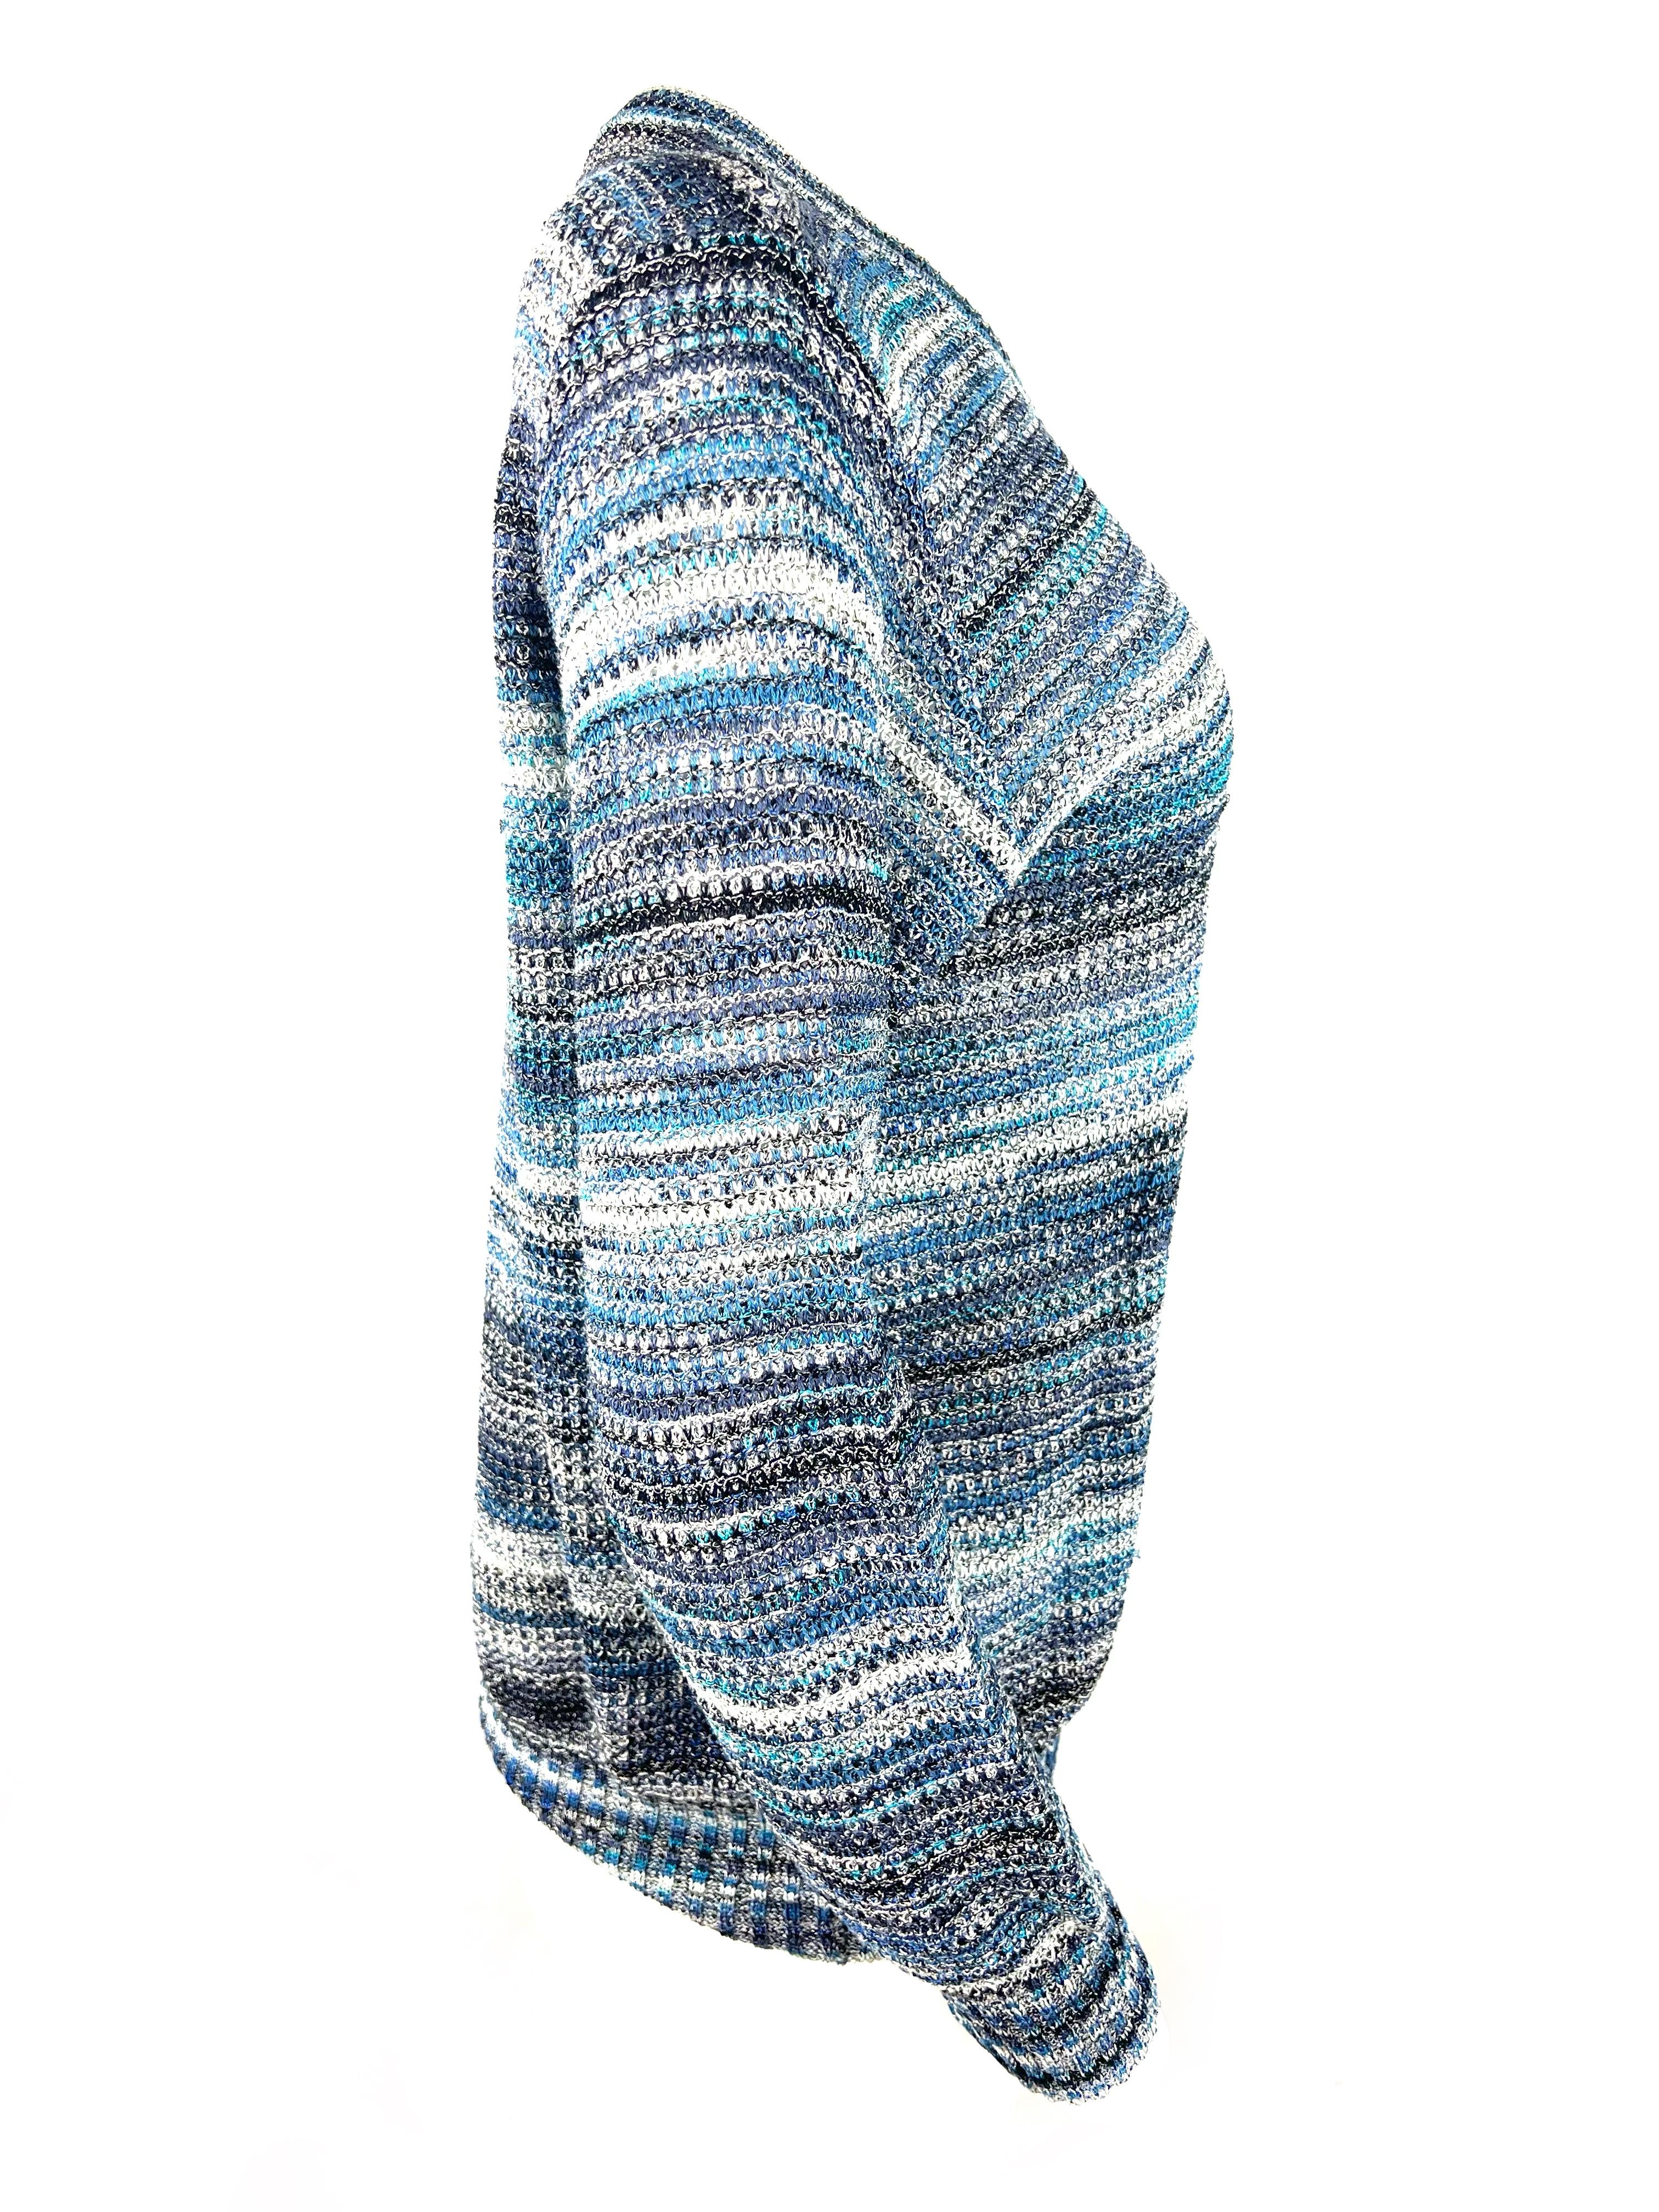 Product details:

The sweater features blue striped patter, v neckline and long sleeves.